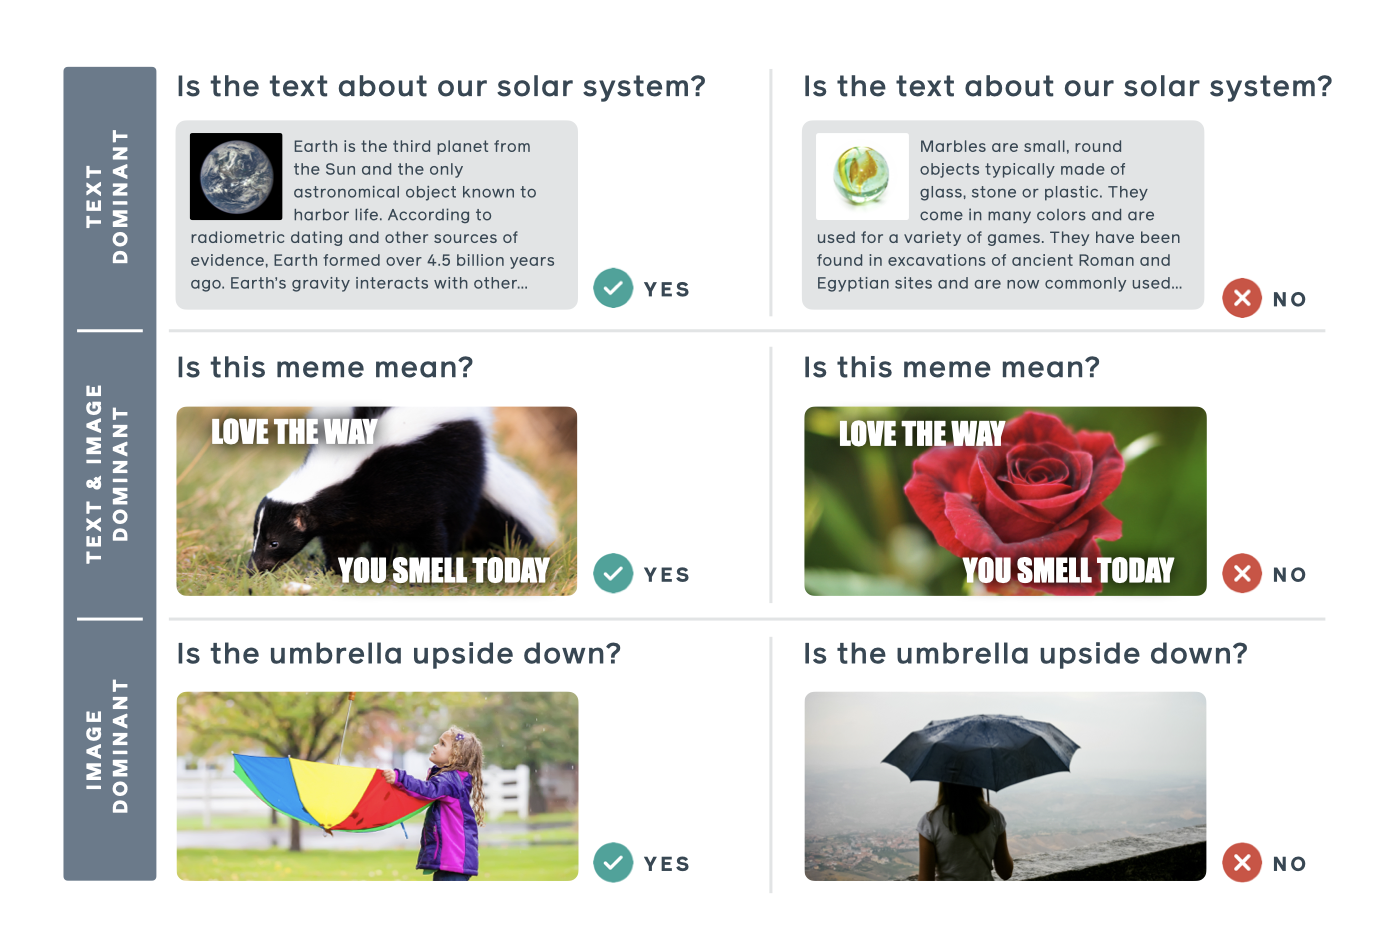 Image shows three ways to understand information. Only middle section requires contextual understanding in order to understand the meaning - Facebook launches a competition for AI developers to fight “hateful memes” on its platforms